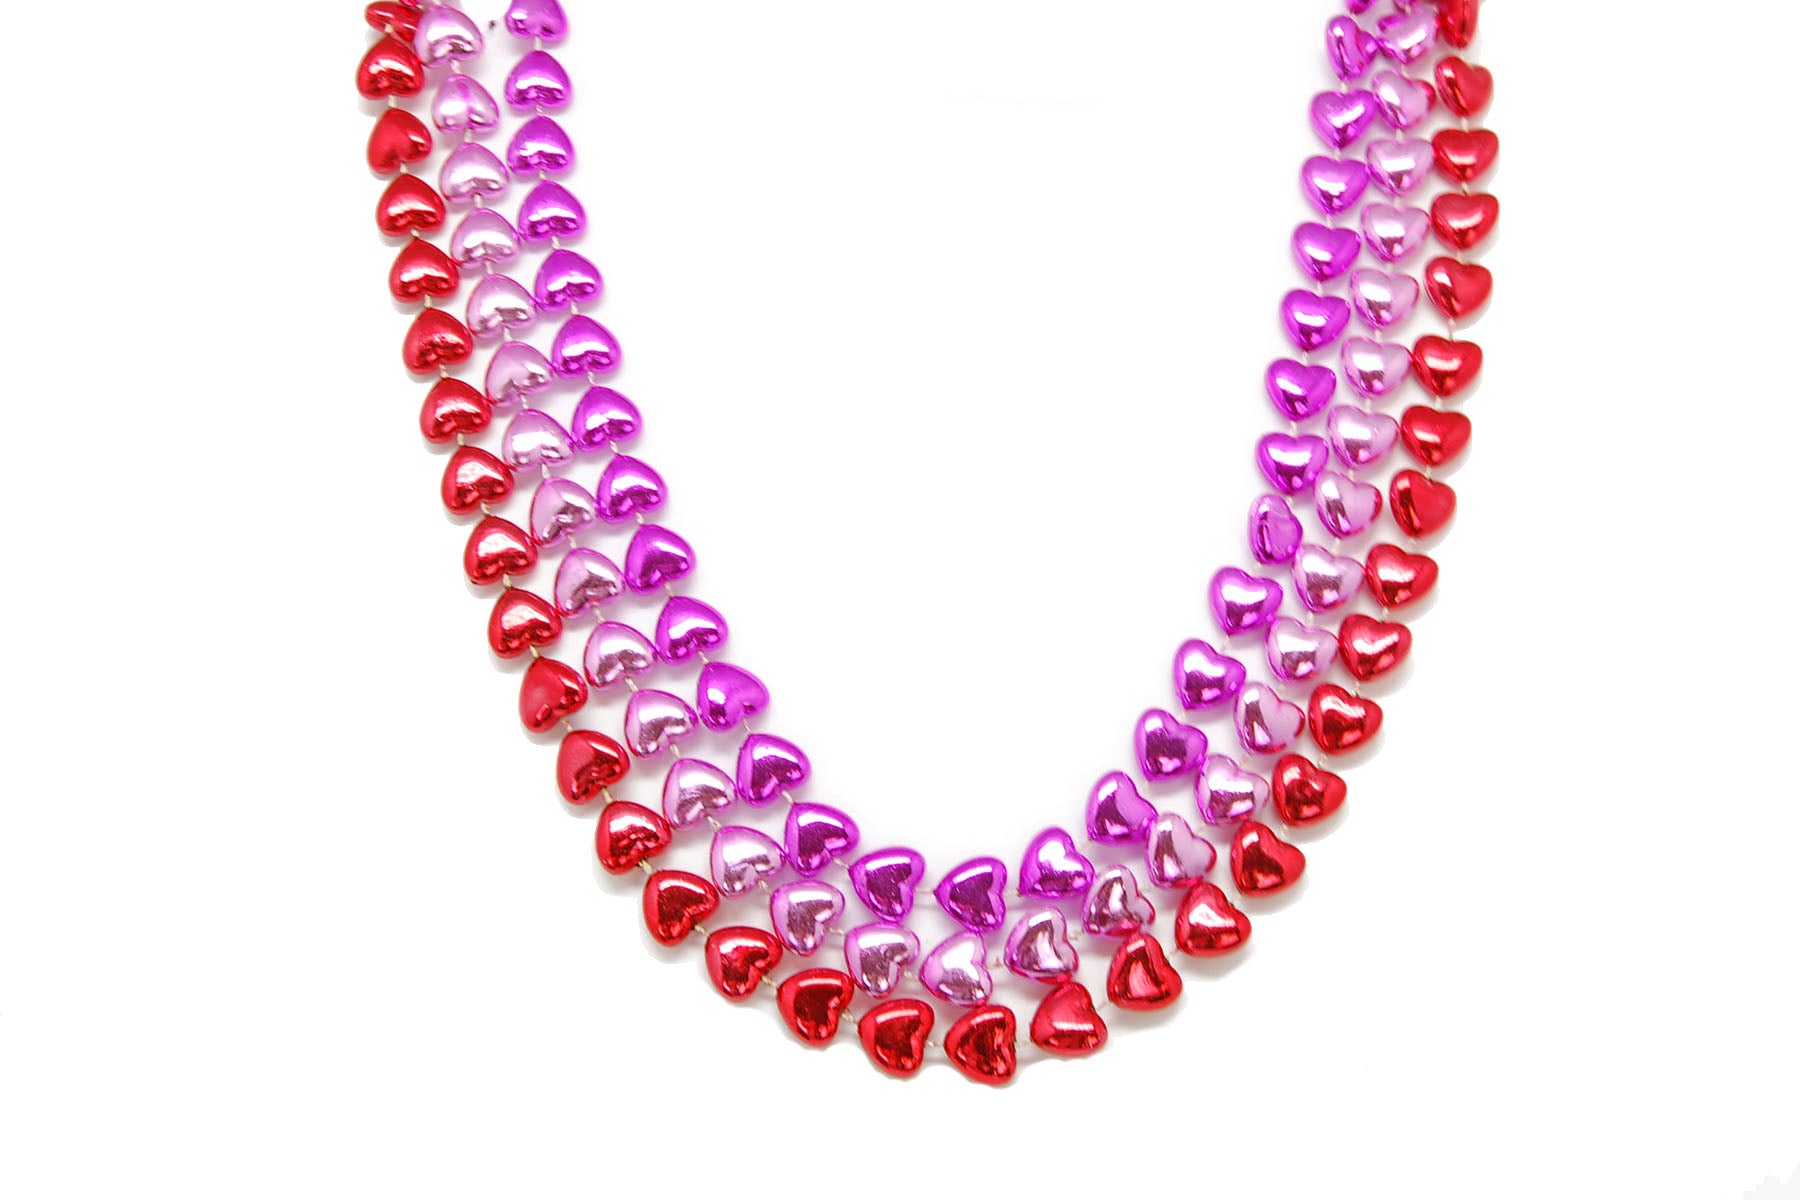 33 7mm Global Beads Assorted Neon Colors